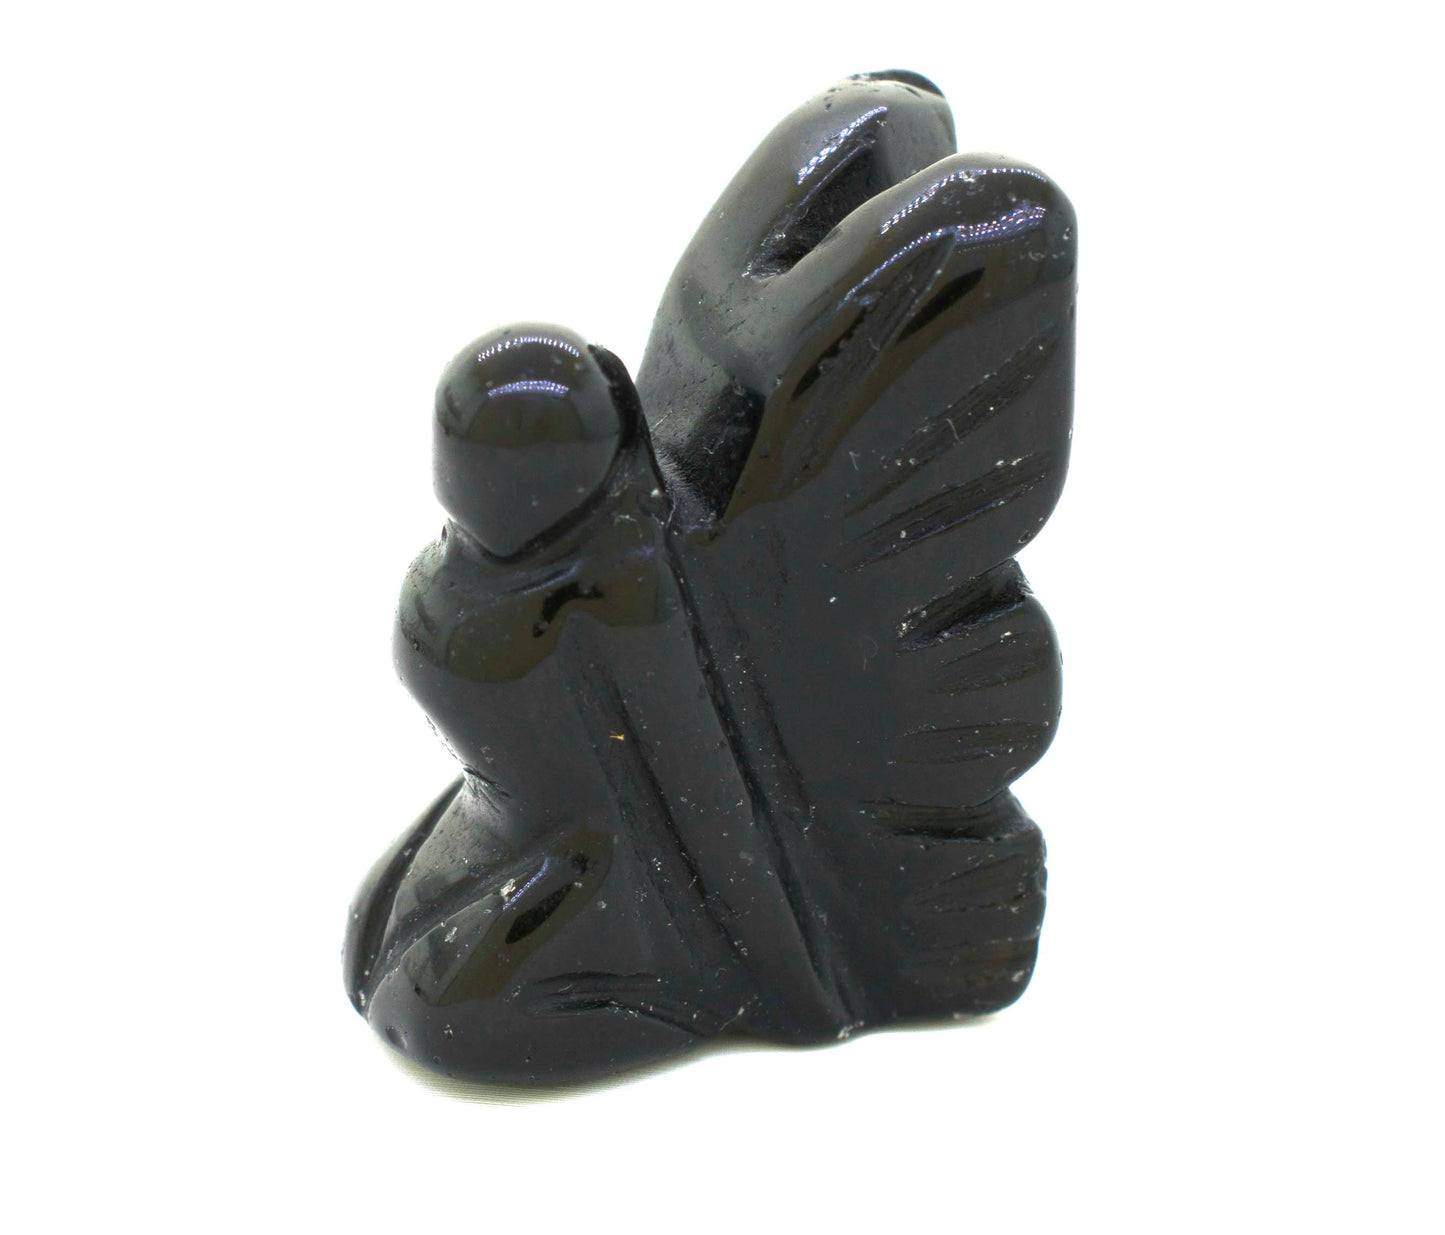 A Carved Fairy Gemstones Figure with wings on a white background, exuding a sense of cottagecore charm.